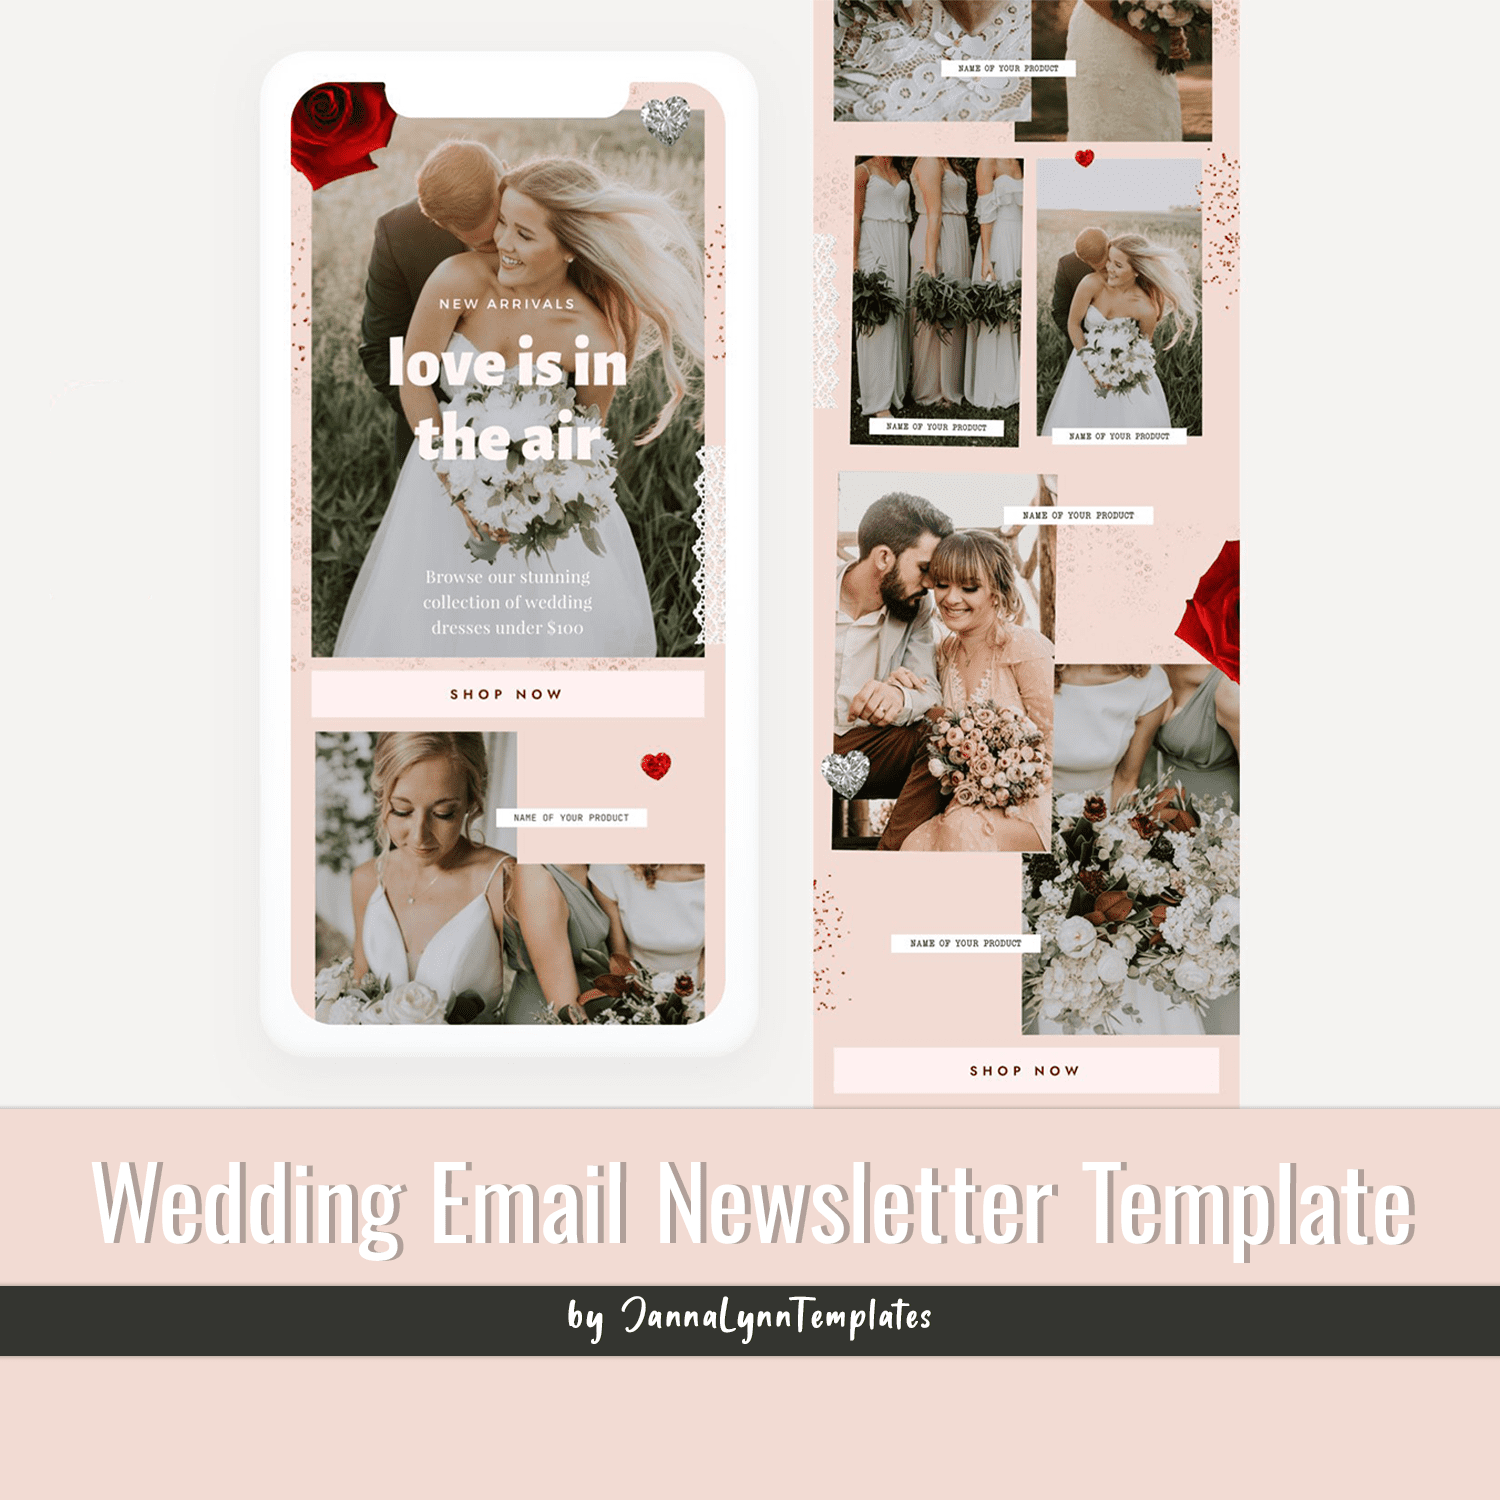 An image pack of a gorgeous wedding email newsletter template.